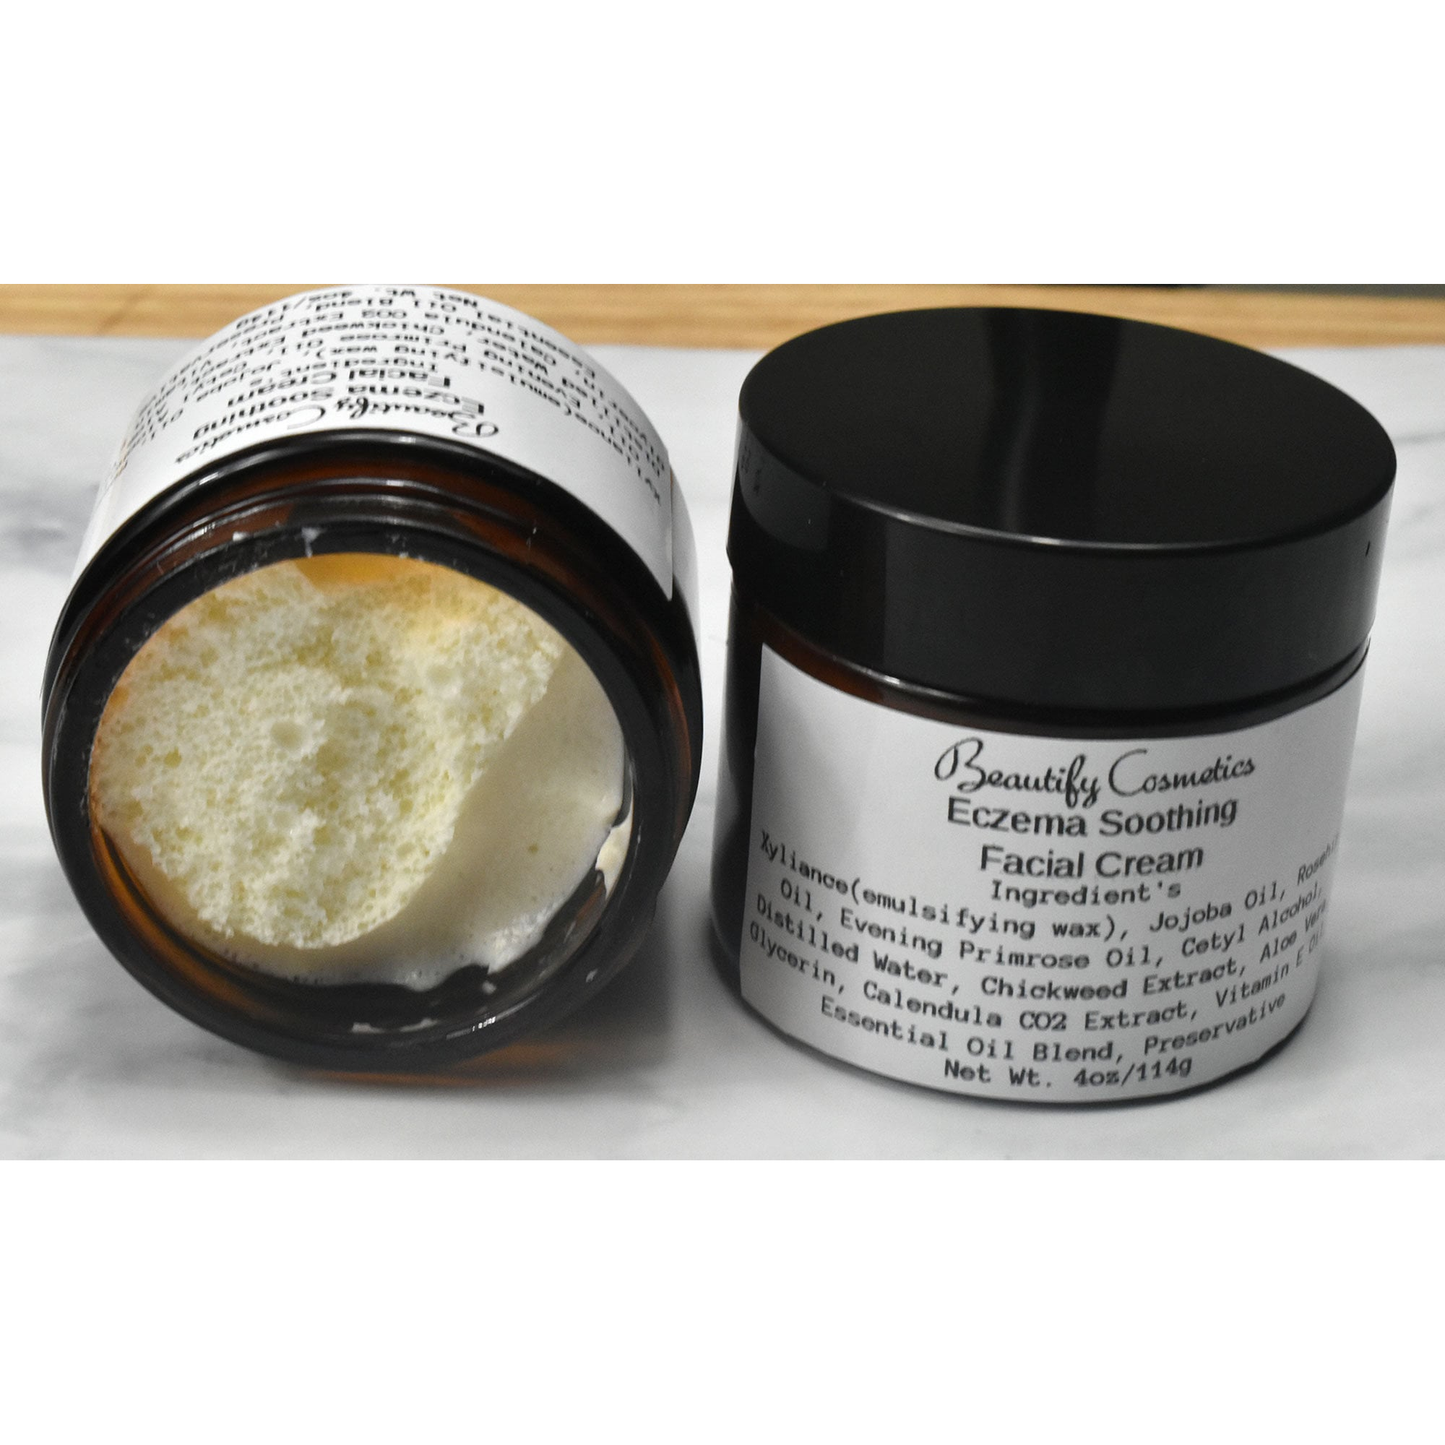 Eczema Soothing Face Cream